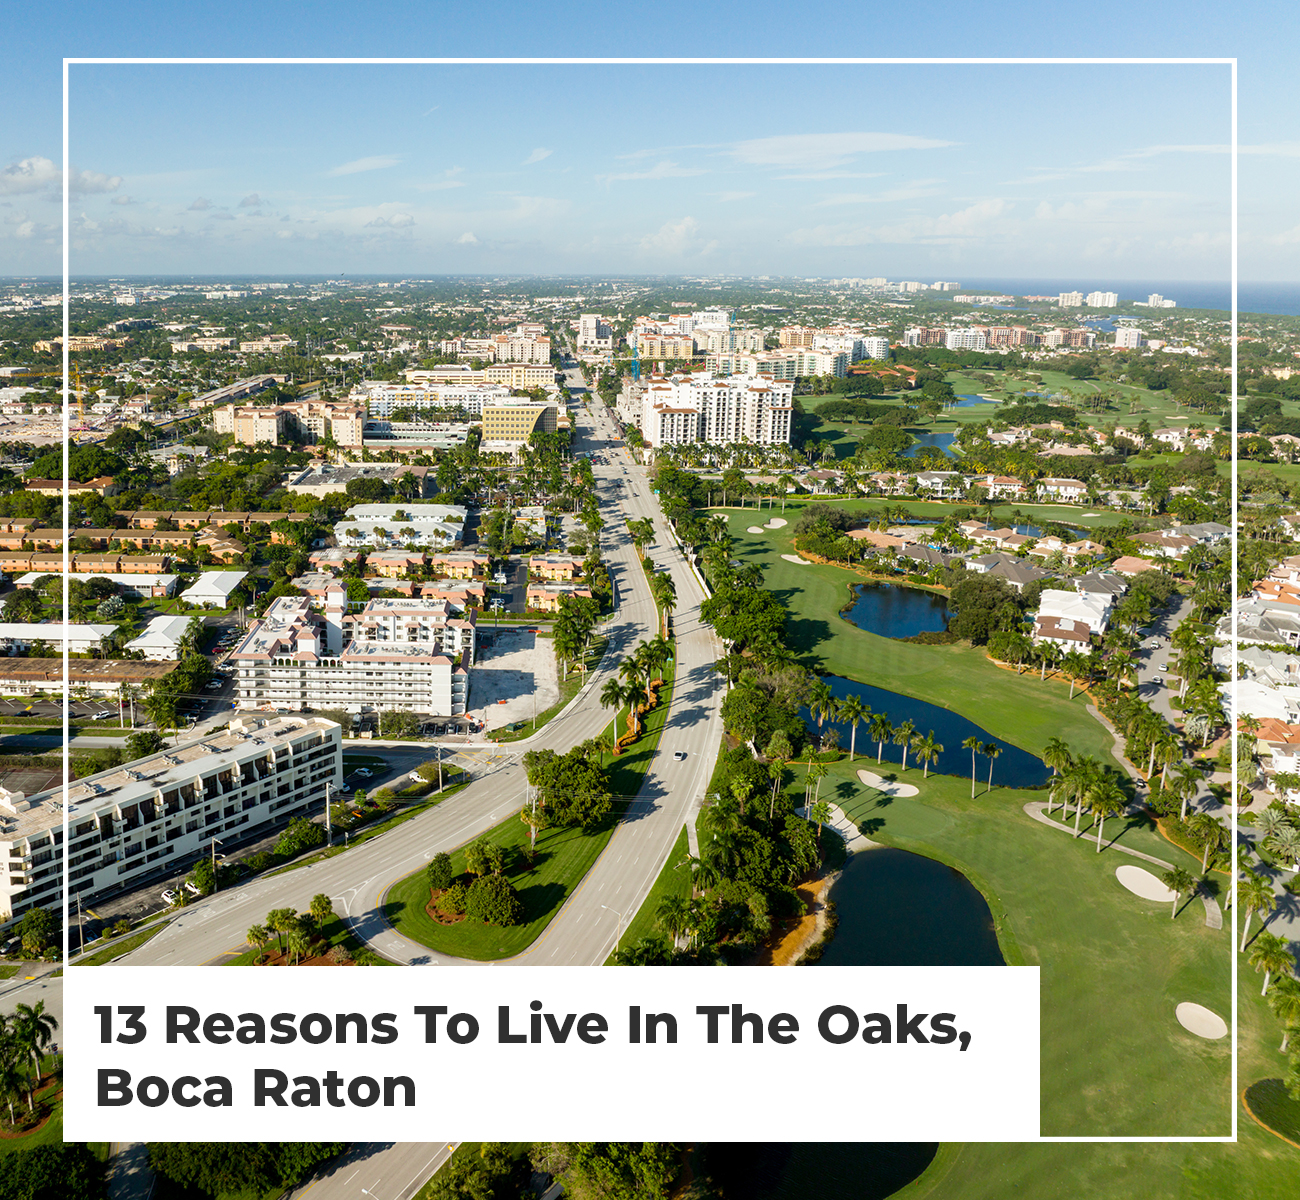 13 Reasons To Live In The Oaks, Boca Raton 